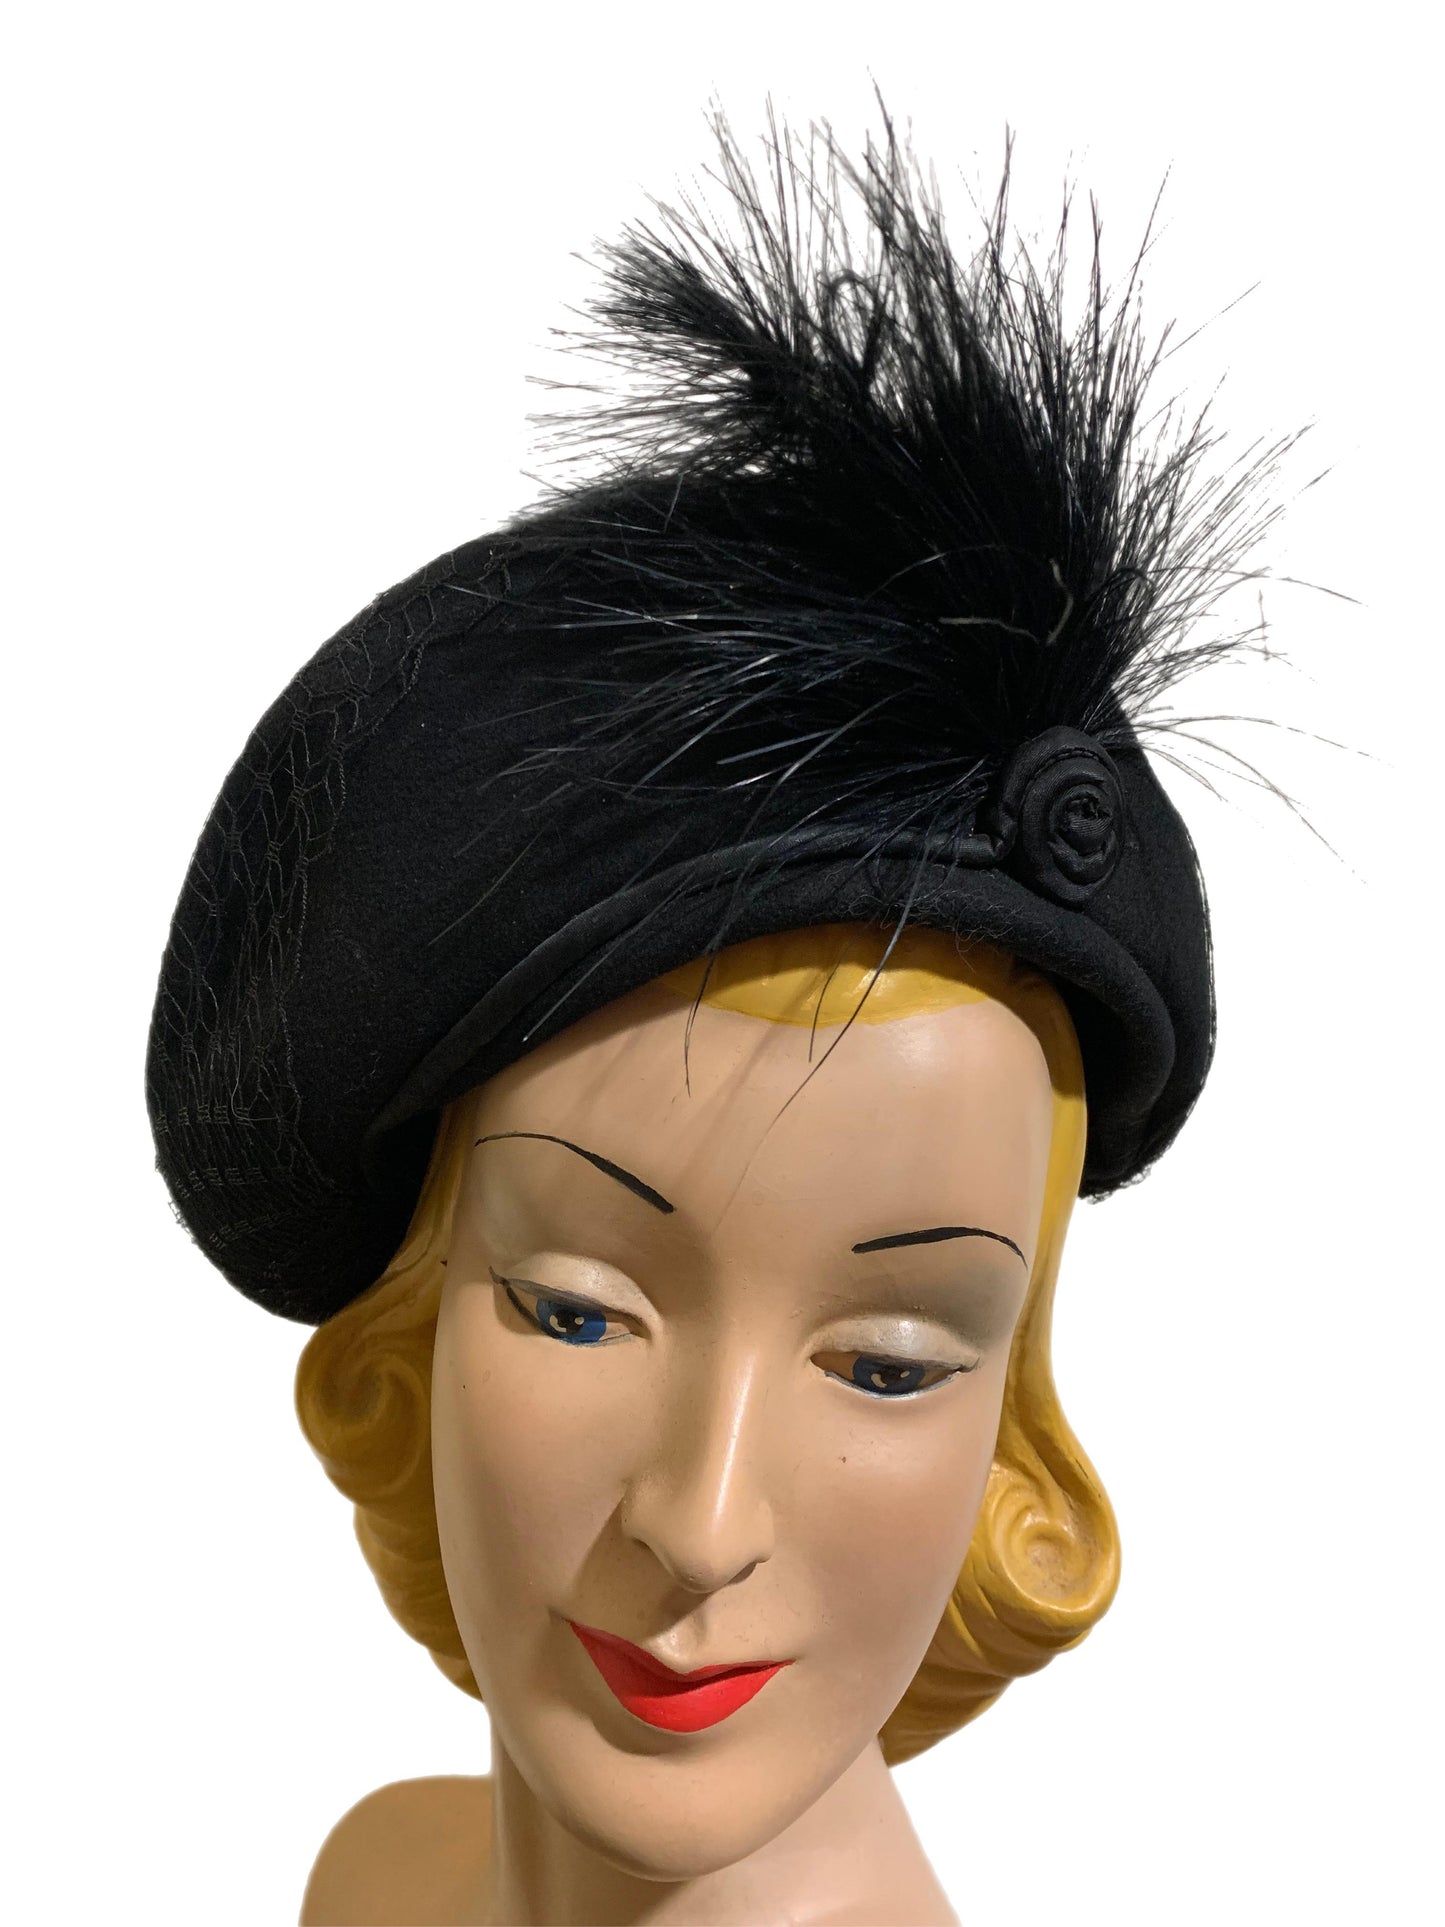 Angled Coal Black Veil Covered Hat with Feather Plume circa 1940s